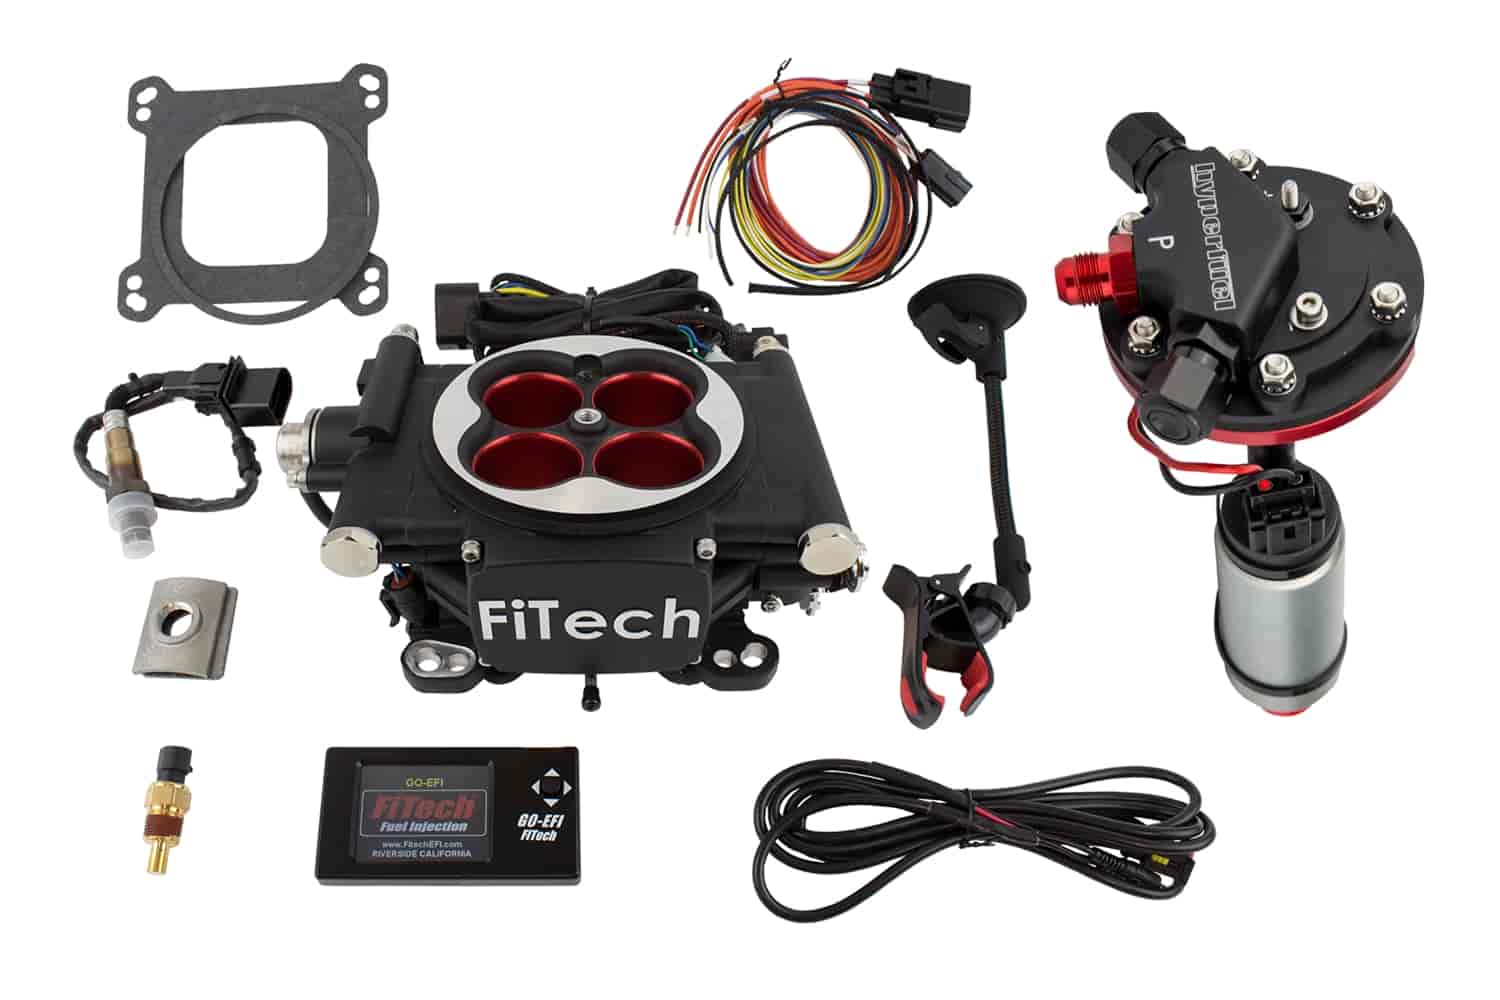 Go EFI-4 Power Adder 600 HP Throttle Body System Master Kit Includes: Hy-Fuel Tight-Fit In-Tank Retrofit Kit